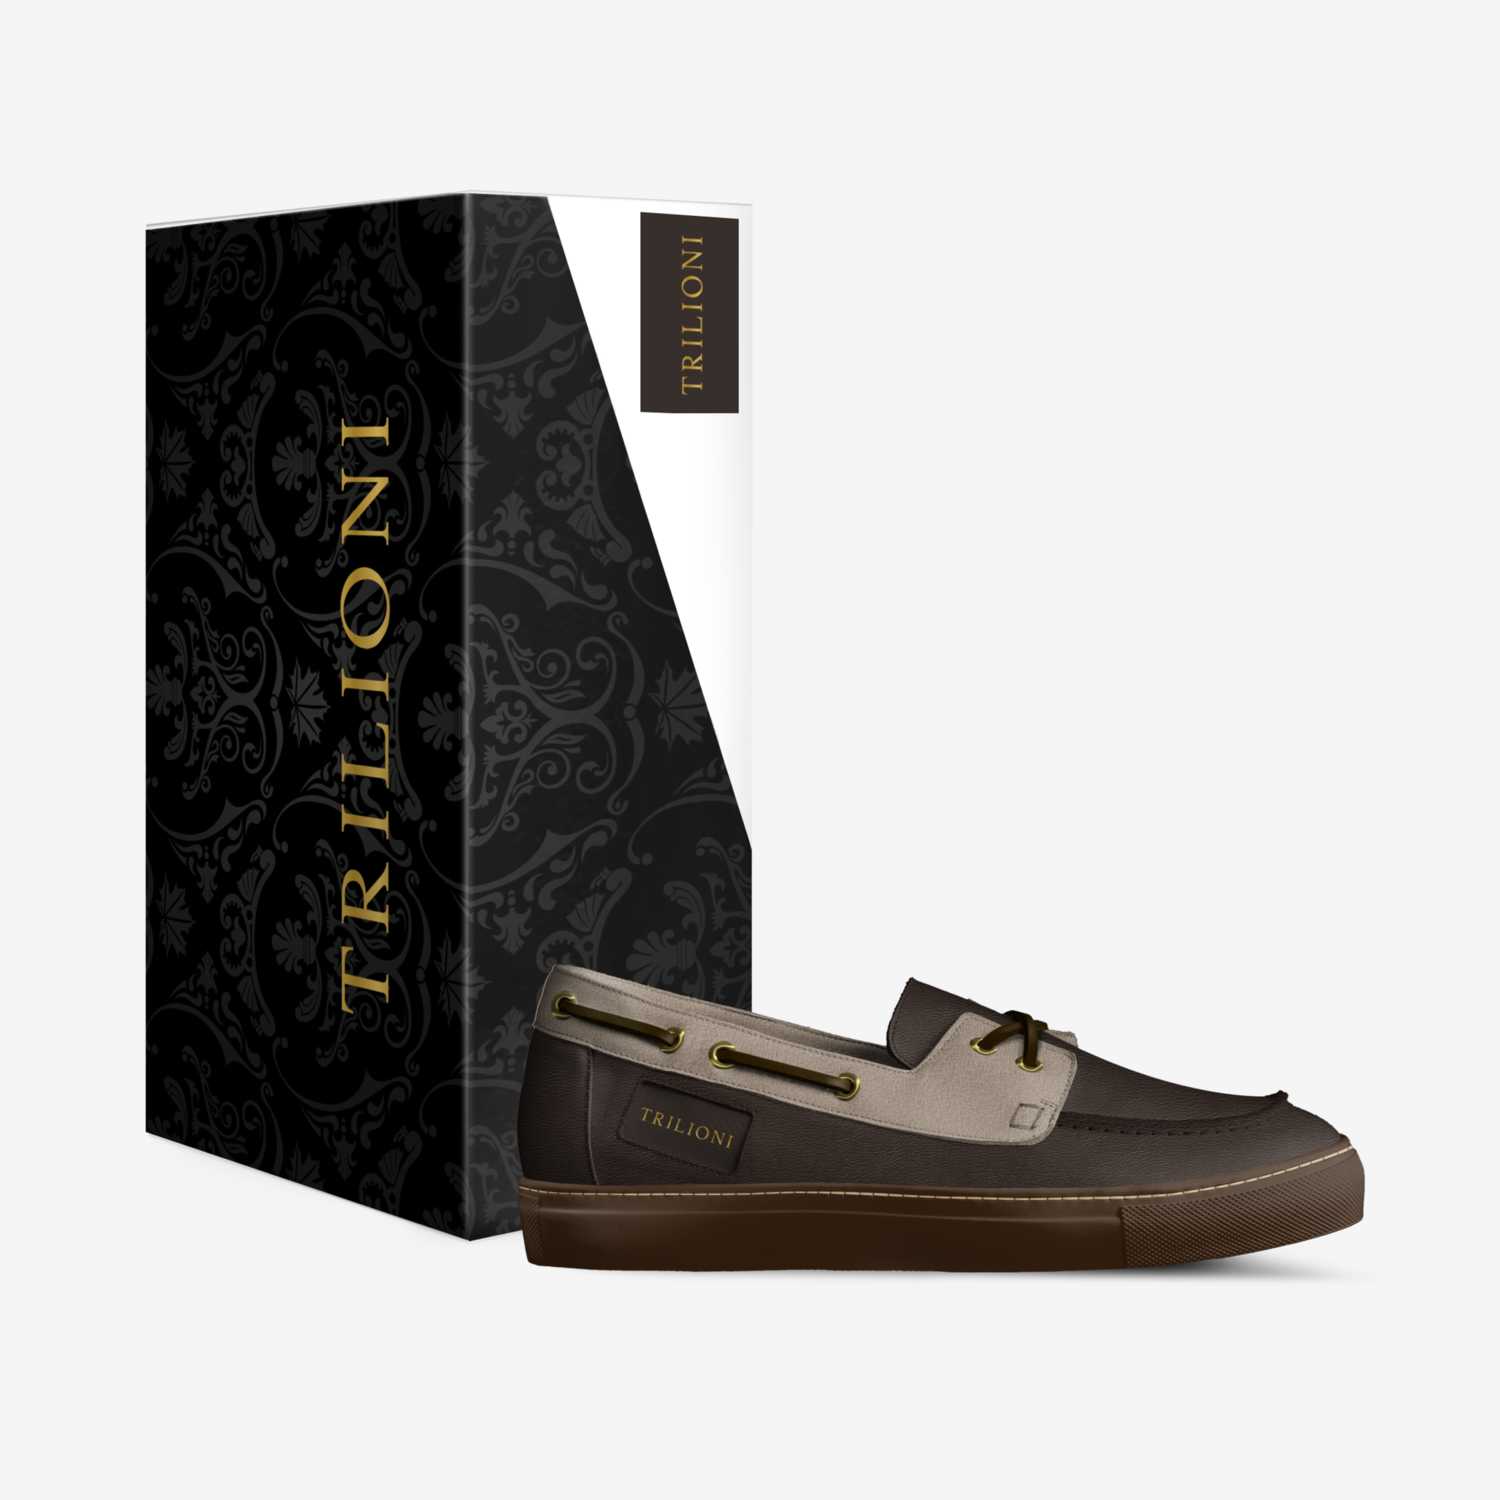 Trilioni "Olympus"  custom made in Italy shoes by Jay Frye | Box view